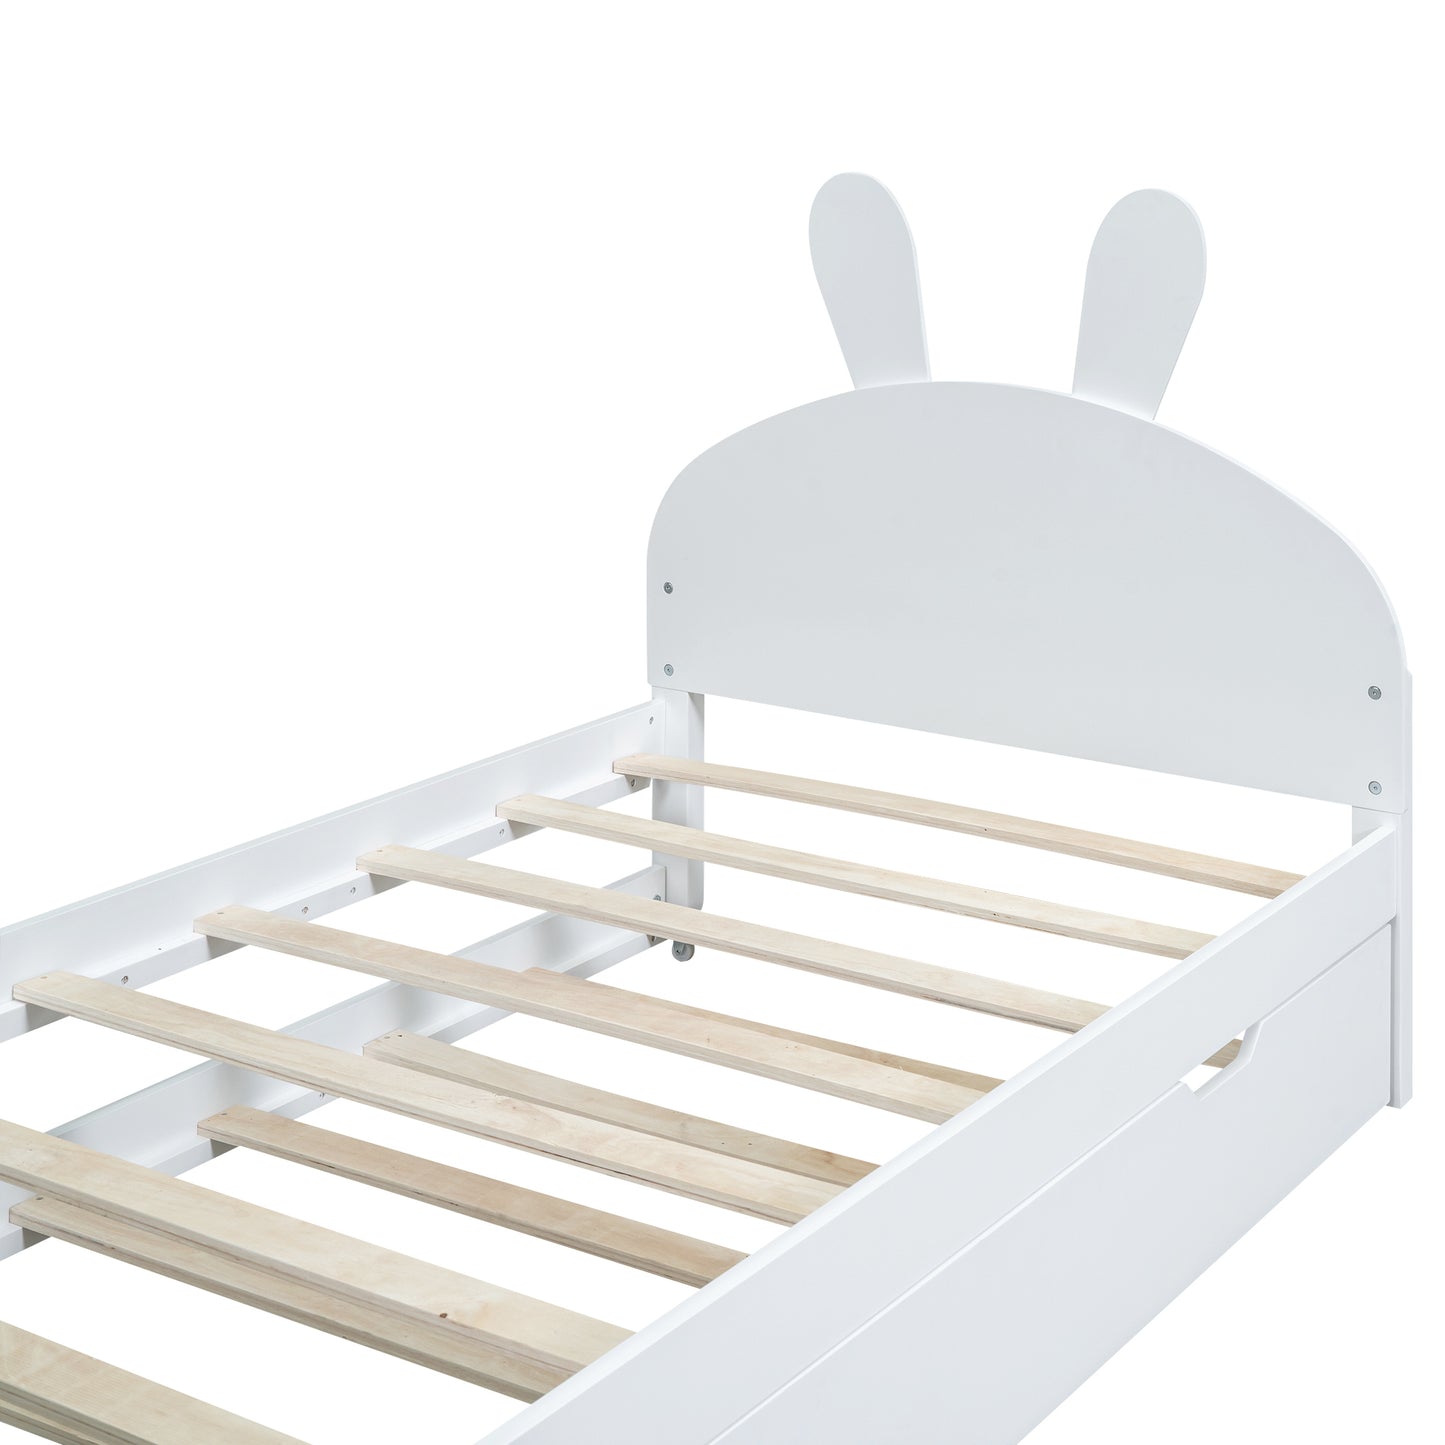 Wood Twin Size Platform Bed with Cartoon Ears Shaped Headboard and Trundle, White